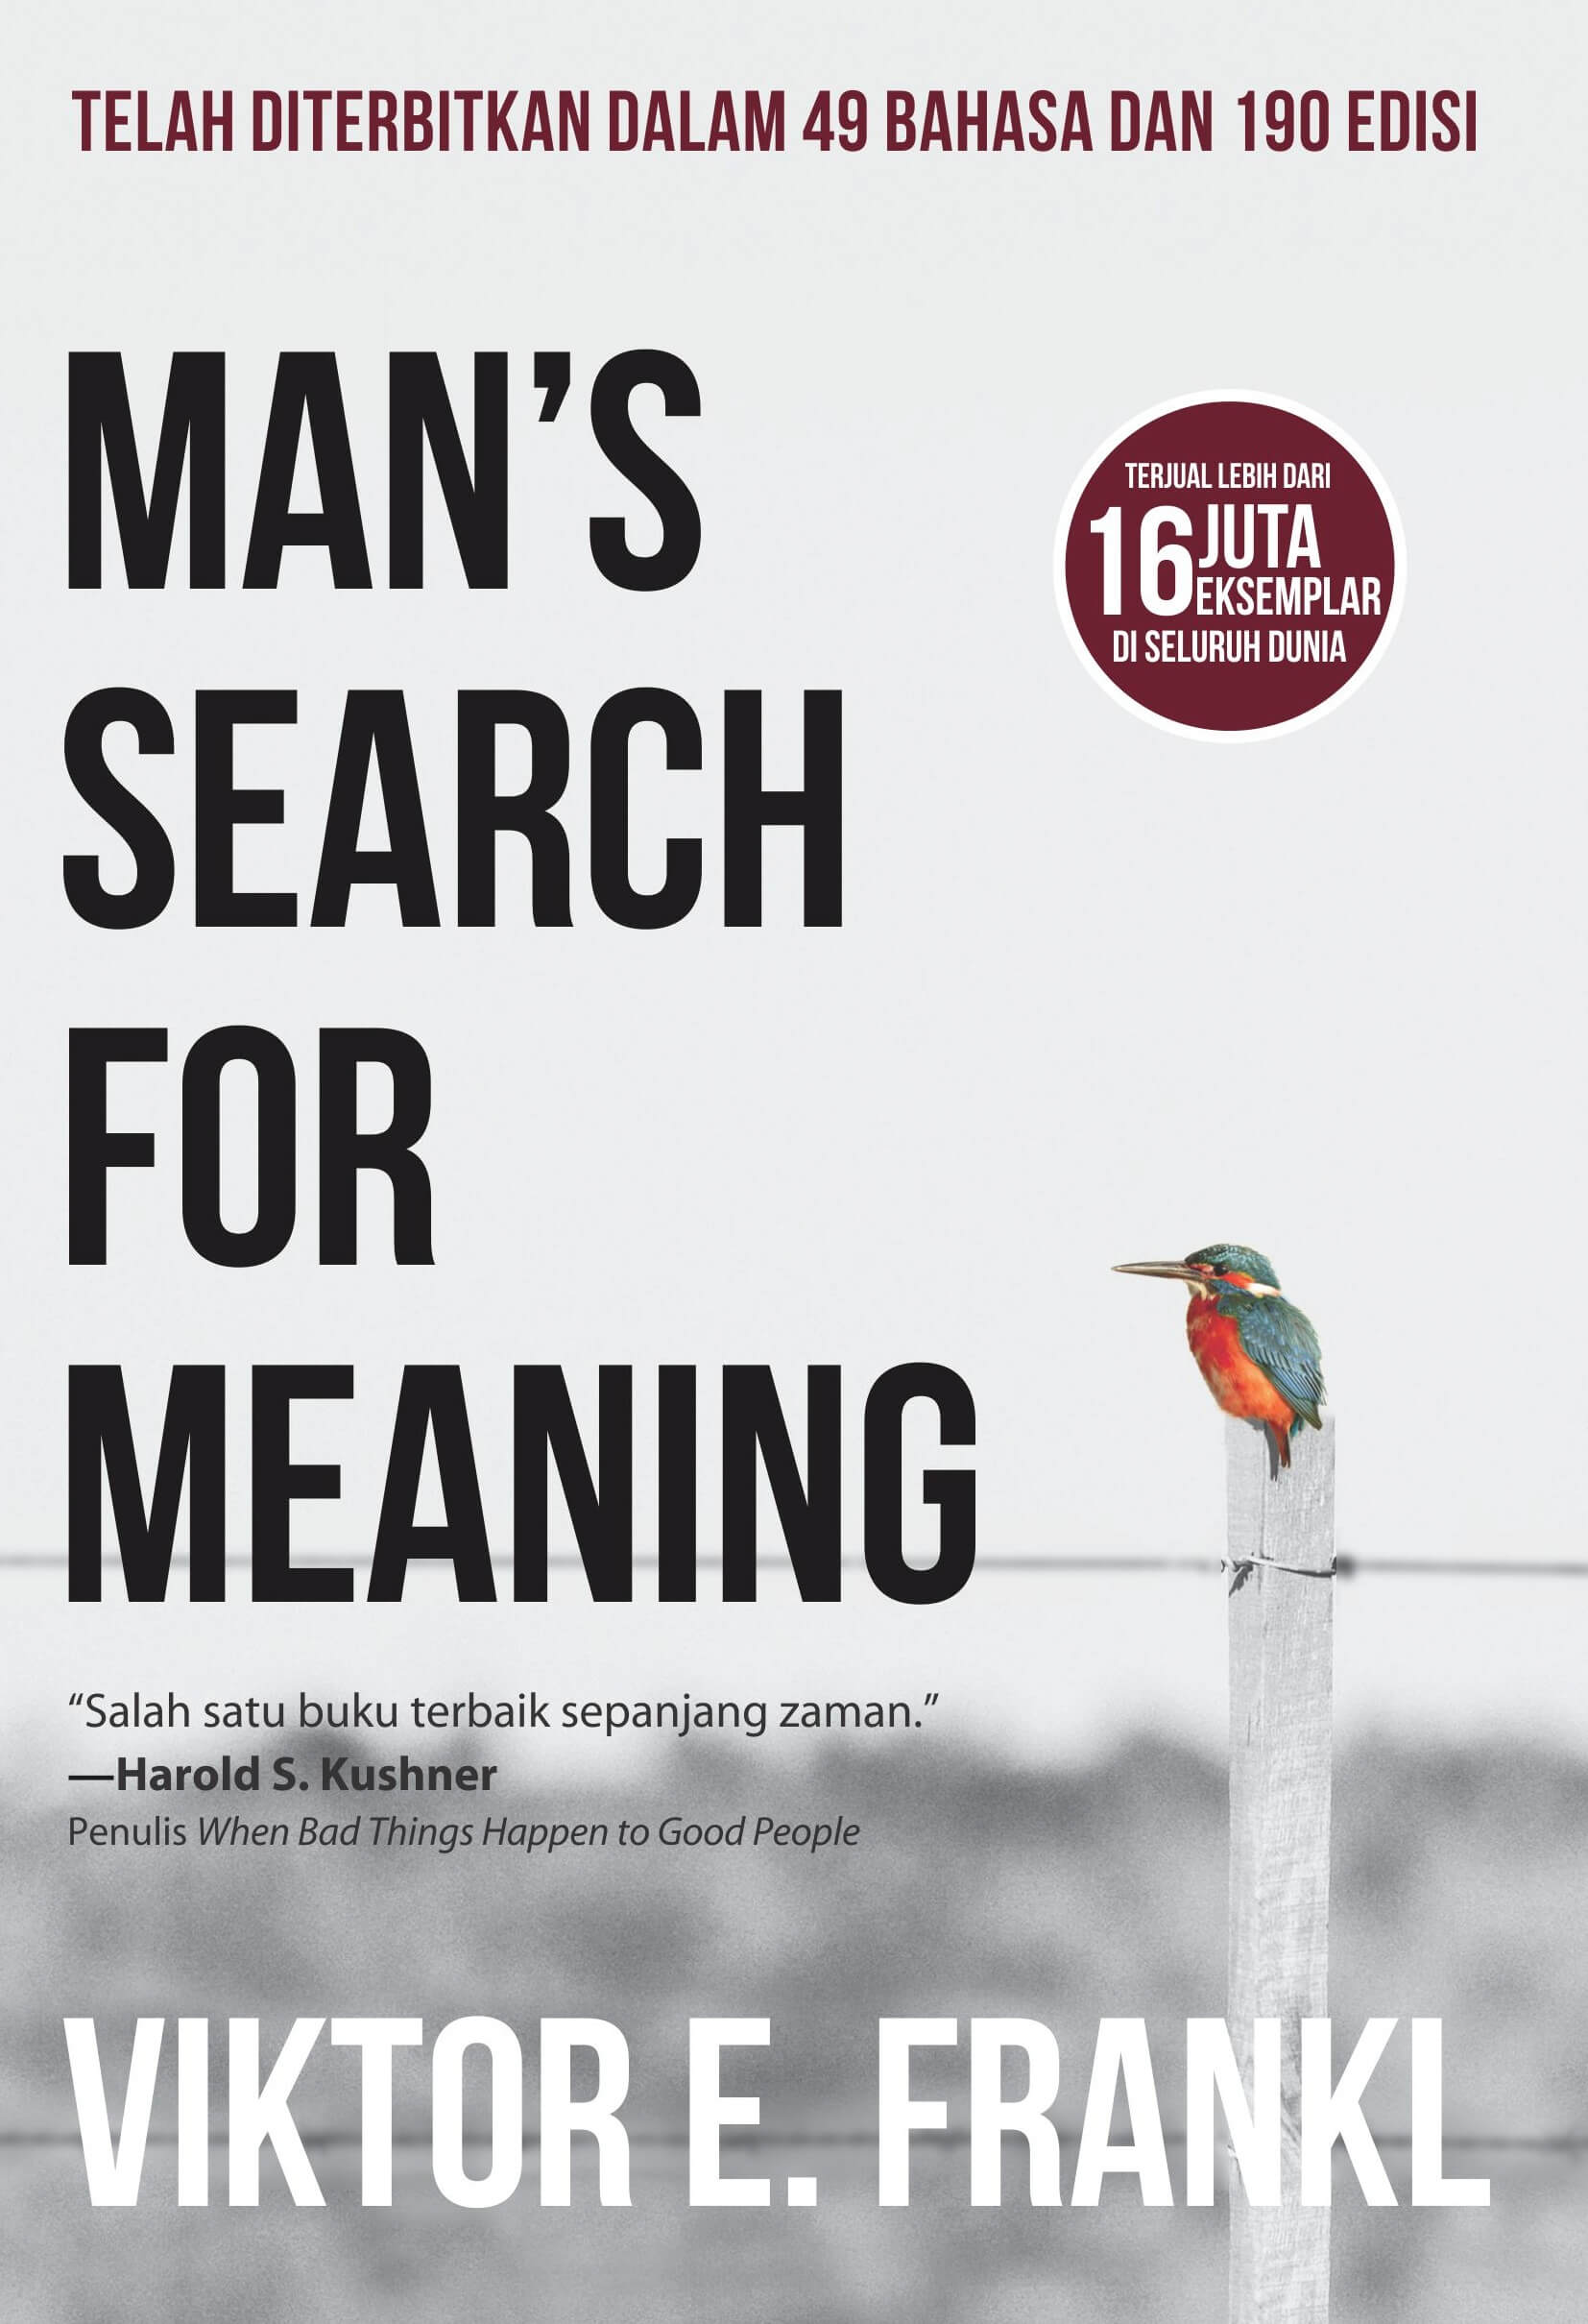 Man’s Search for Meaning